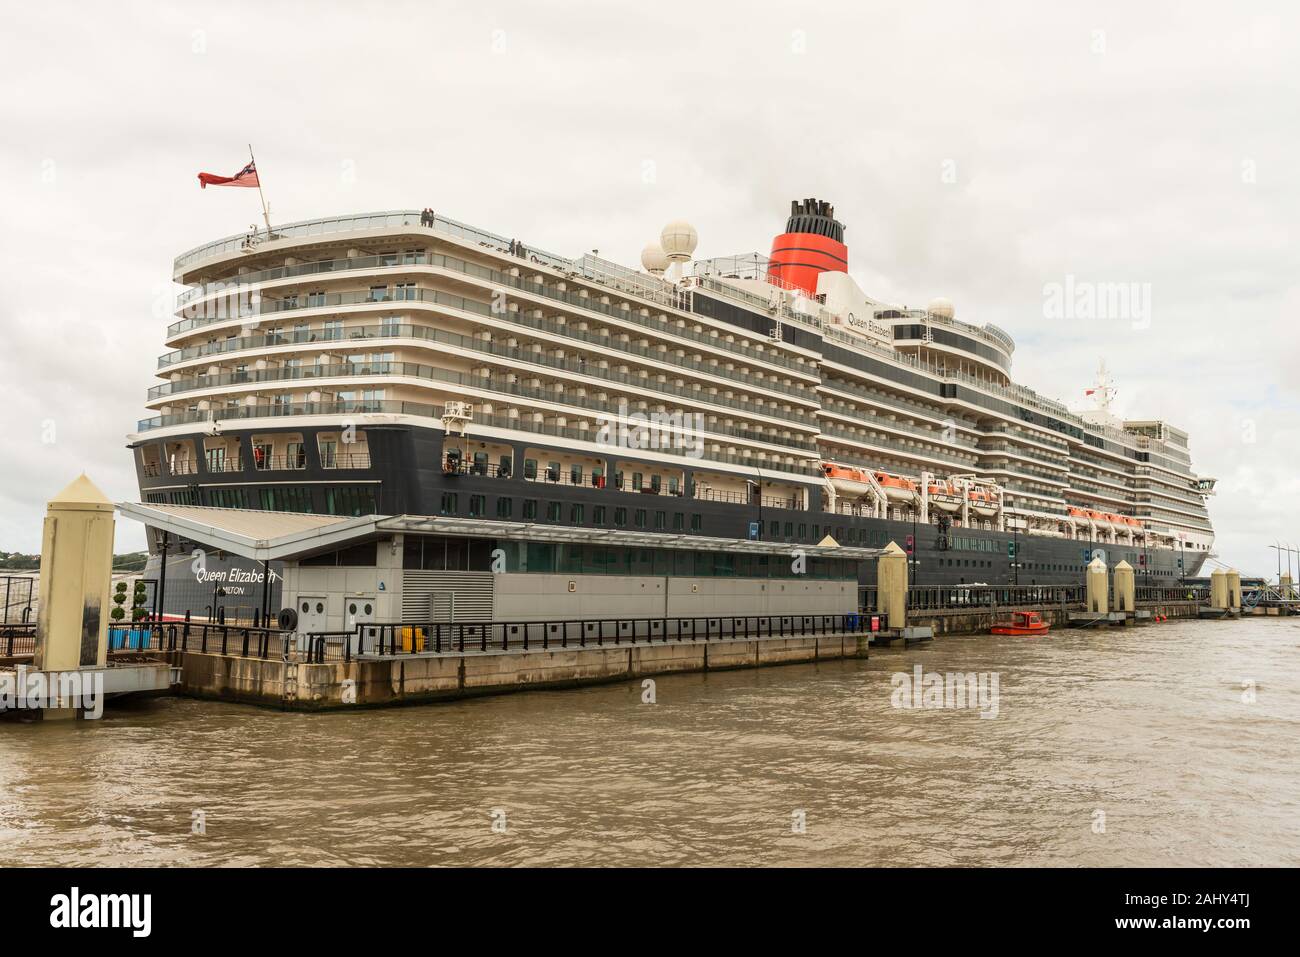 MS Queen Elizabeth (2010), a cruise ship operated by the Cunard Line, berthed at the port of Liverpool cruise terminal, Liverpool, England, UK, Europe Stock Photo